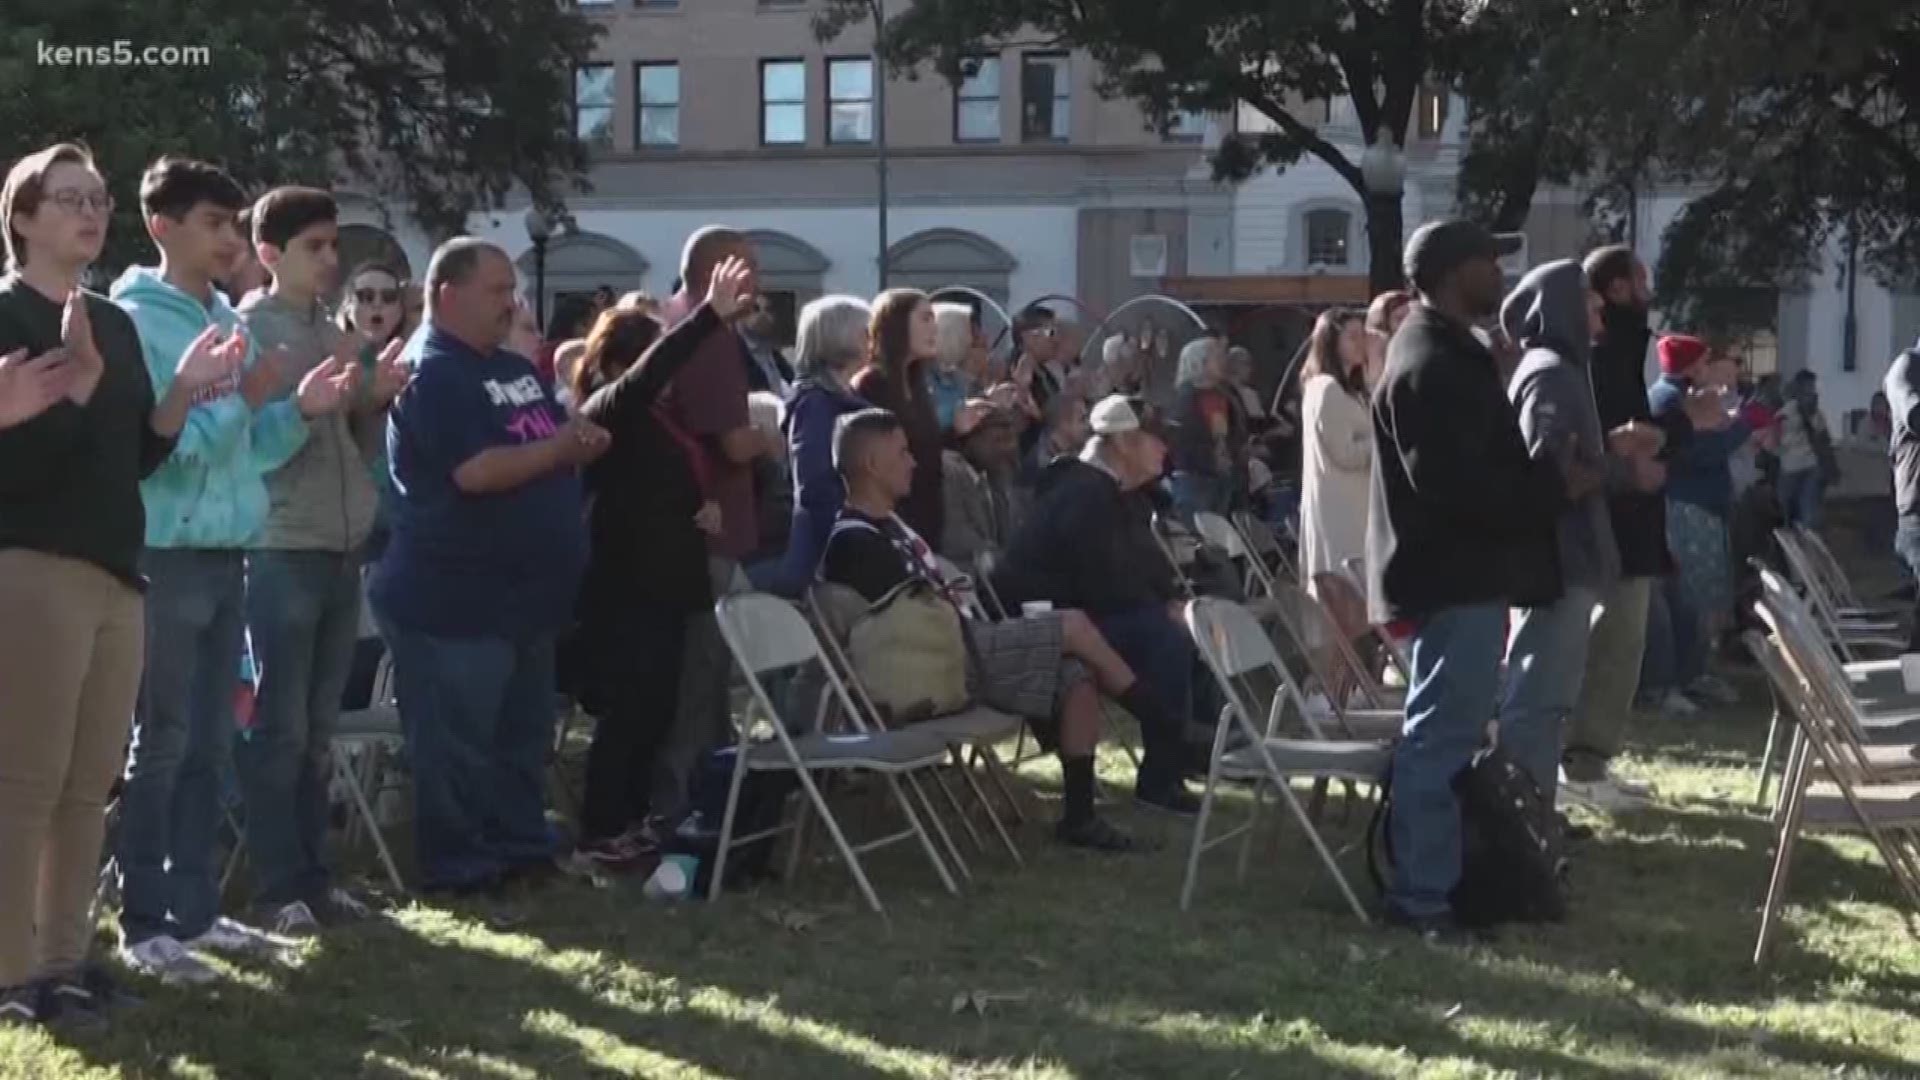 Bundled up with folding chairs in hand, about 200 people from Travis Park Church showed up ready to worship.